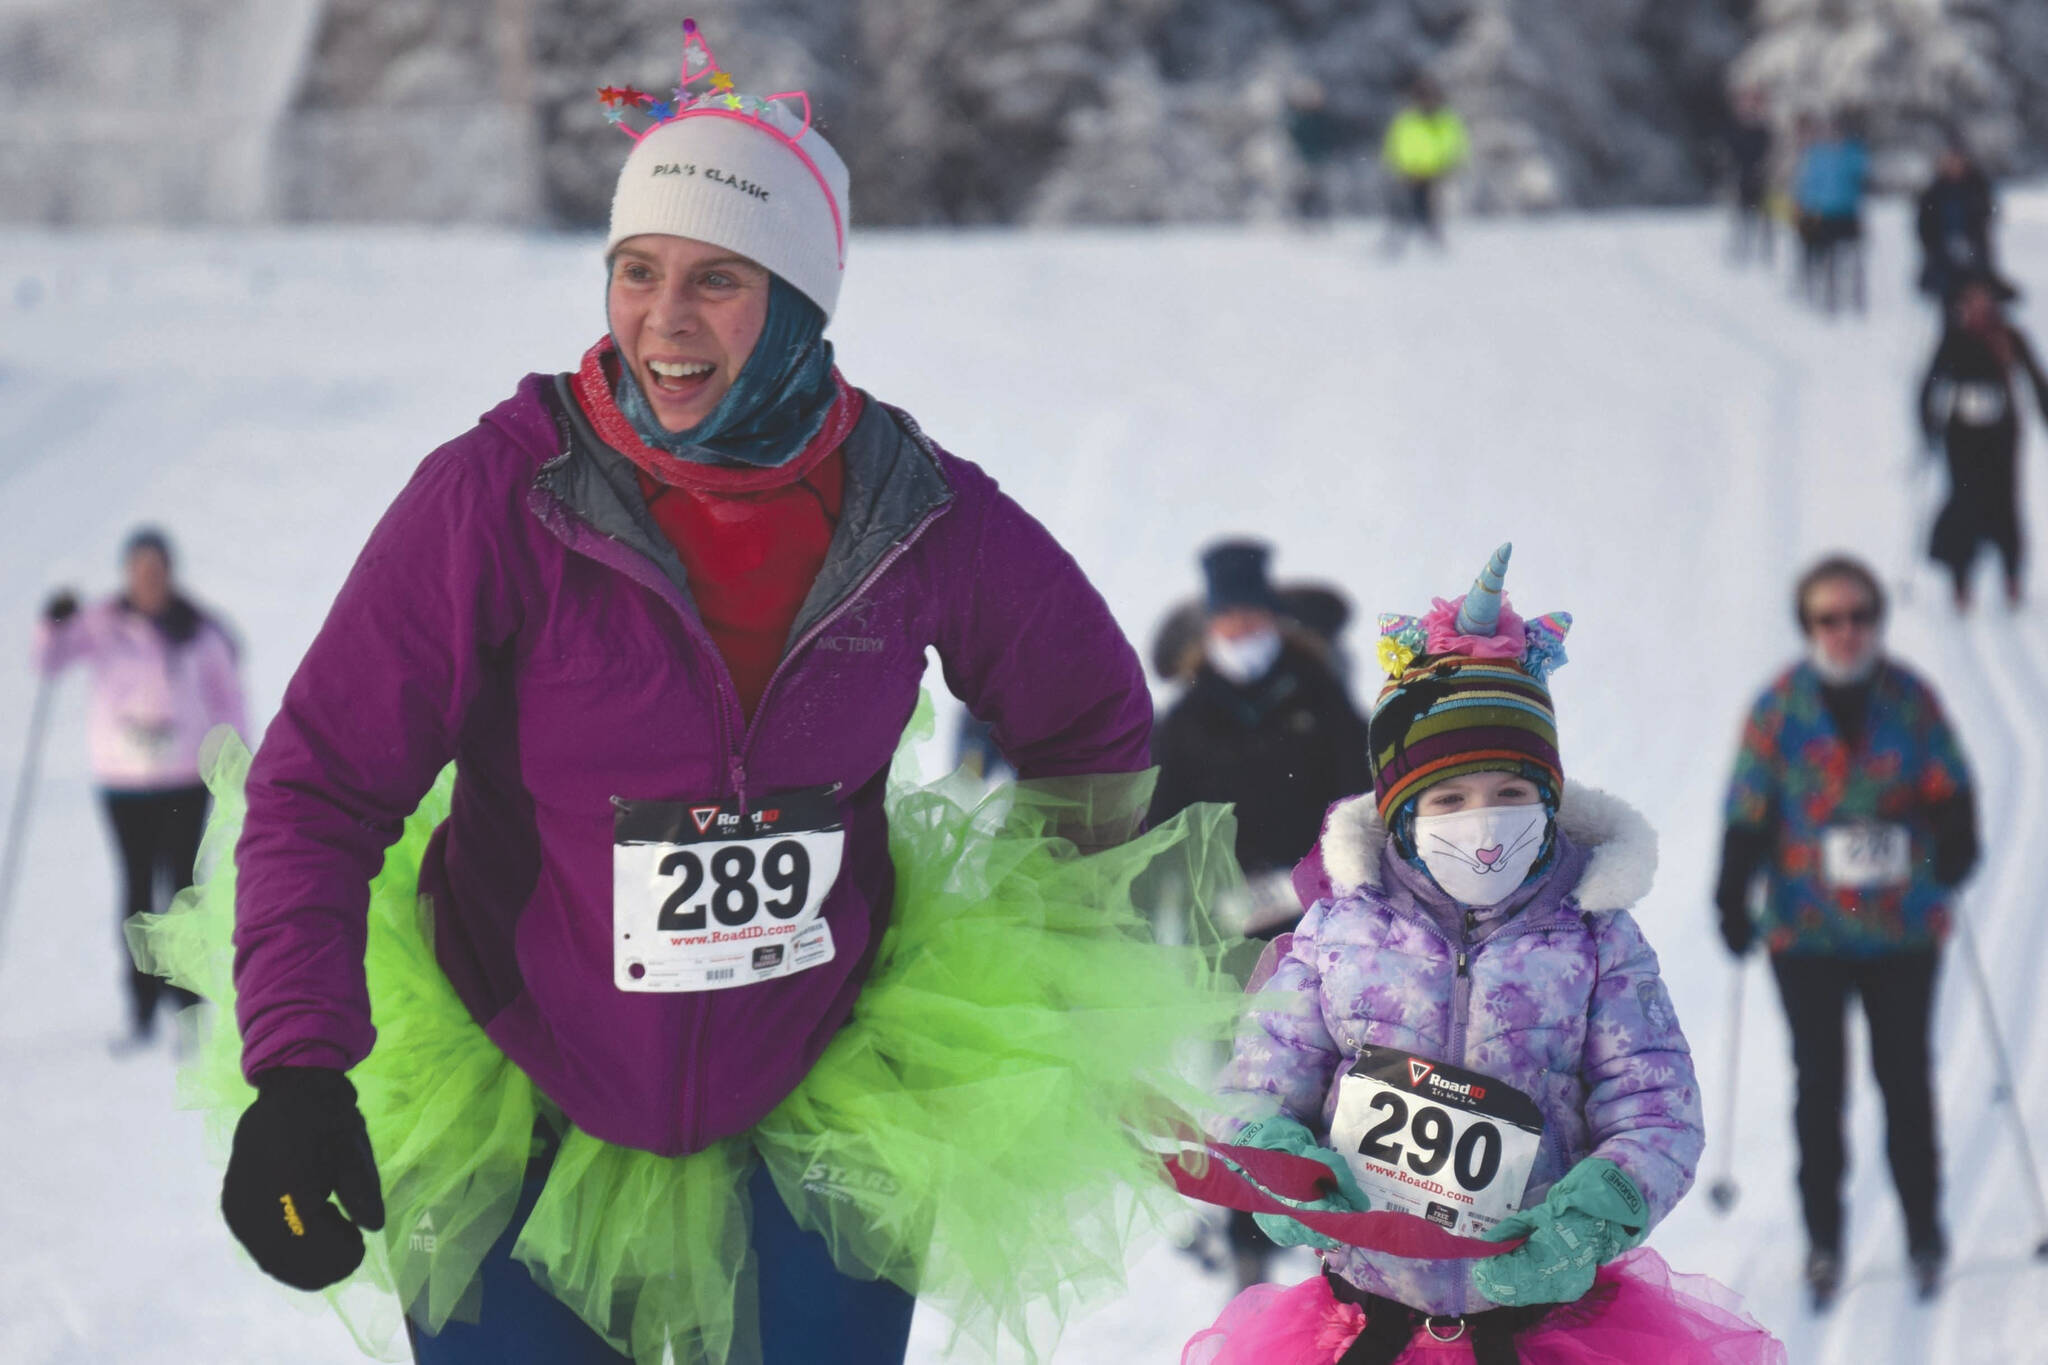 Carly Reimer tows daughter, Lois, at the 17th Ski for Women on Sunday, Feb. 7, 2021, at Tsalteshi Trails just outside of Soldotna, Alaska. (Photo by Jeff Helminiak/Peninsula Clarion)